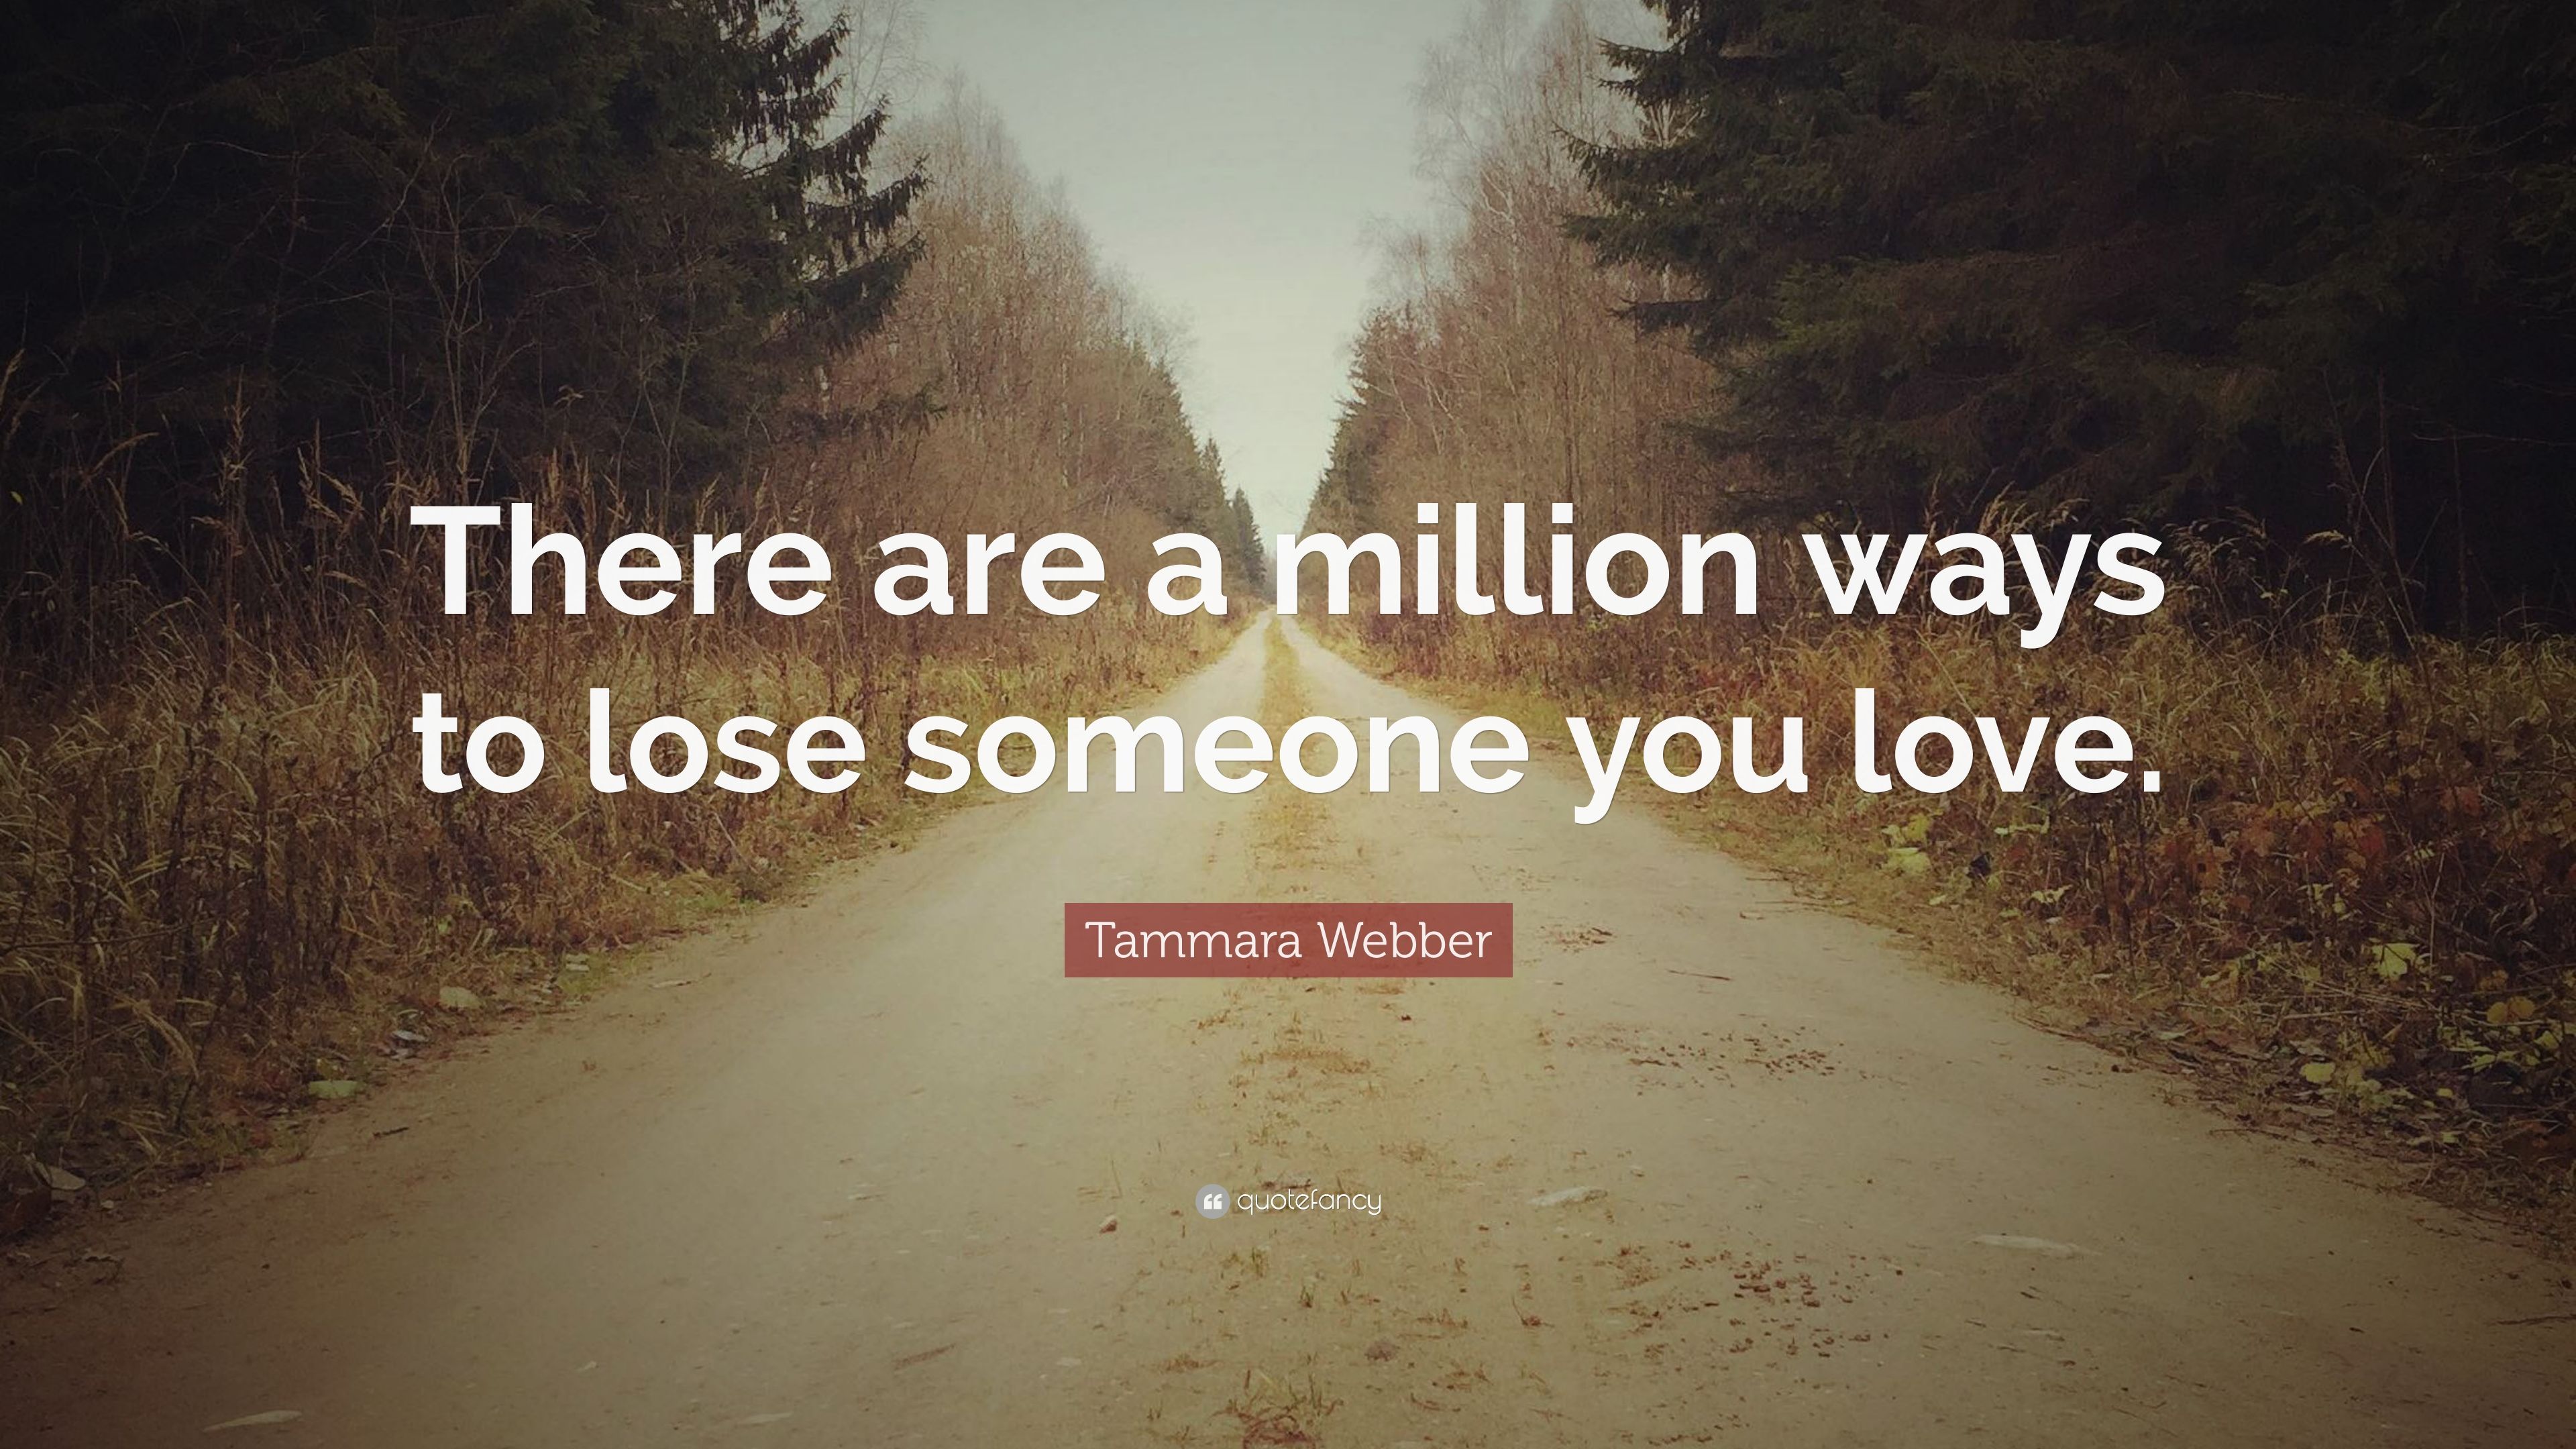 Tammara Webber Quote: “There are a million ways to lose someone